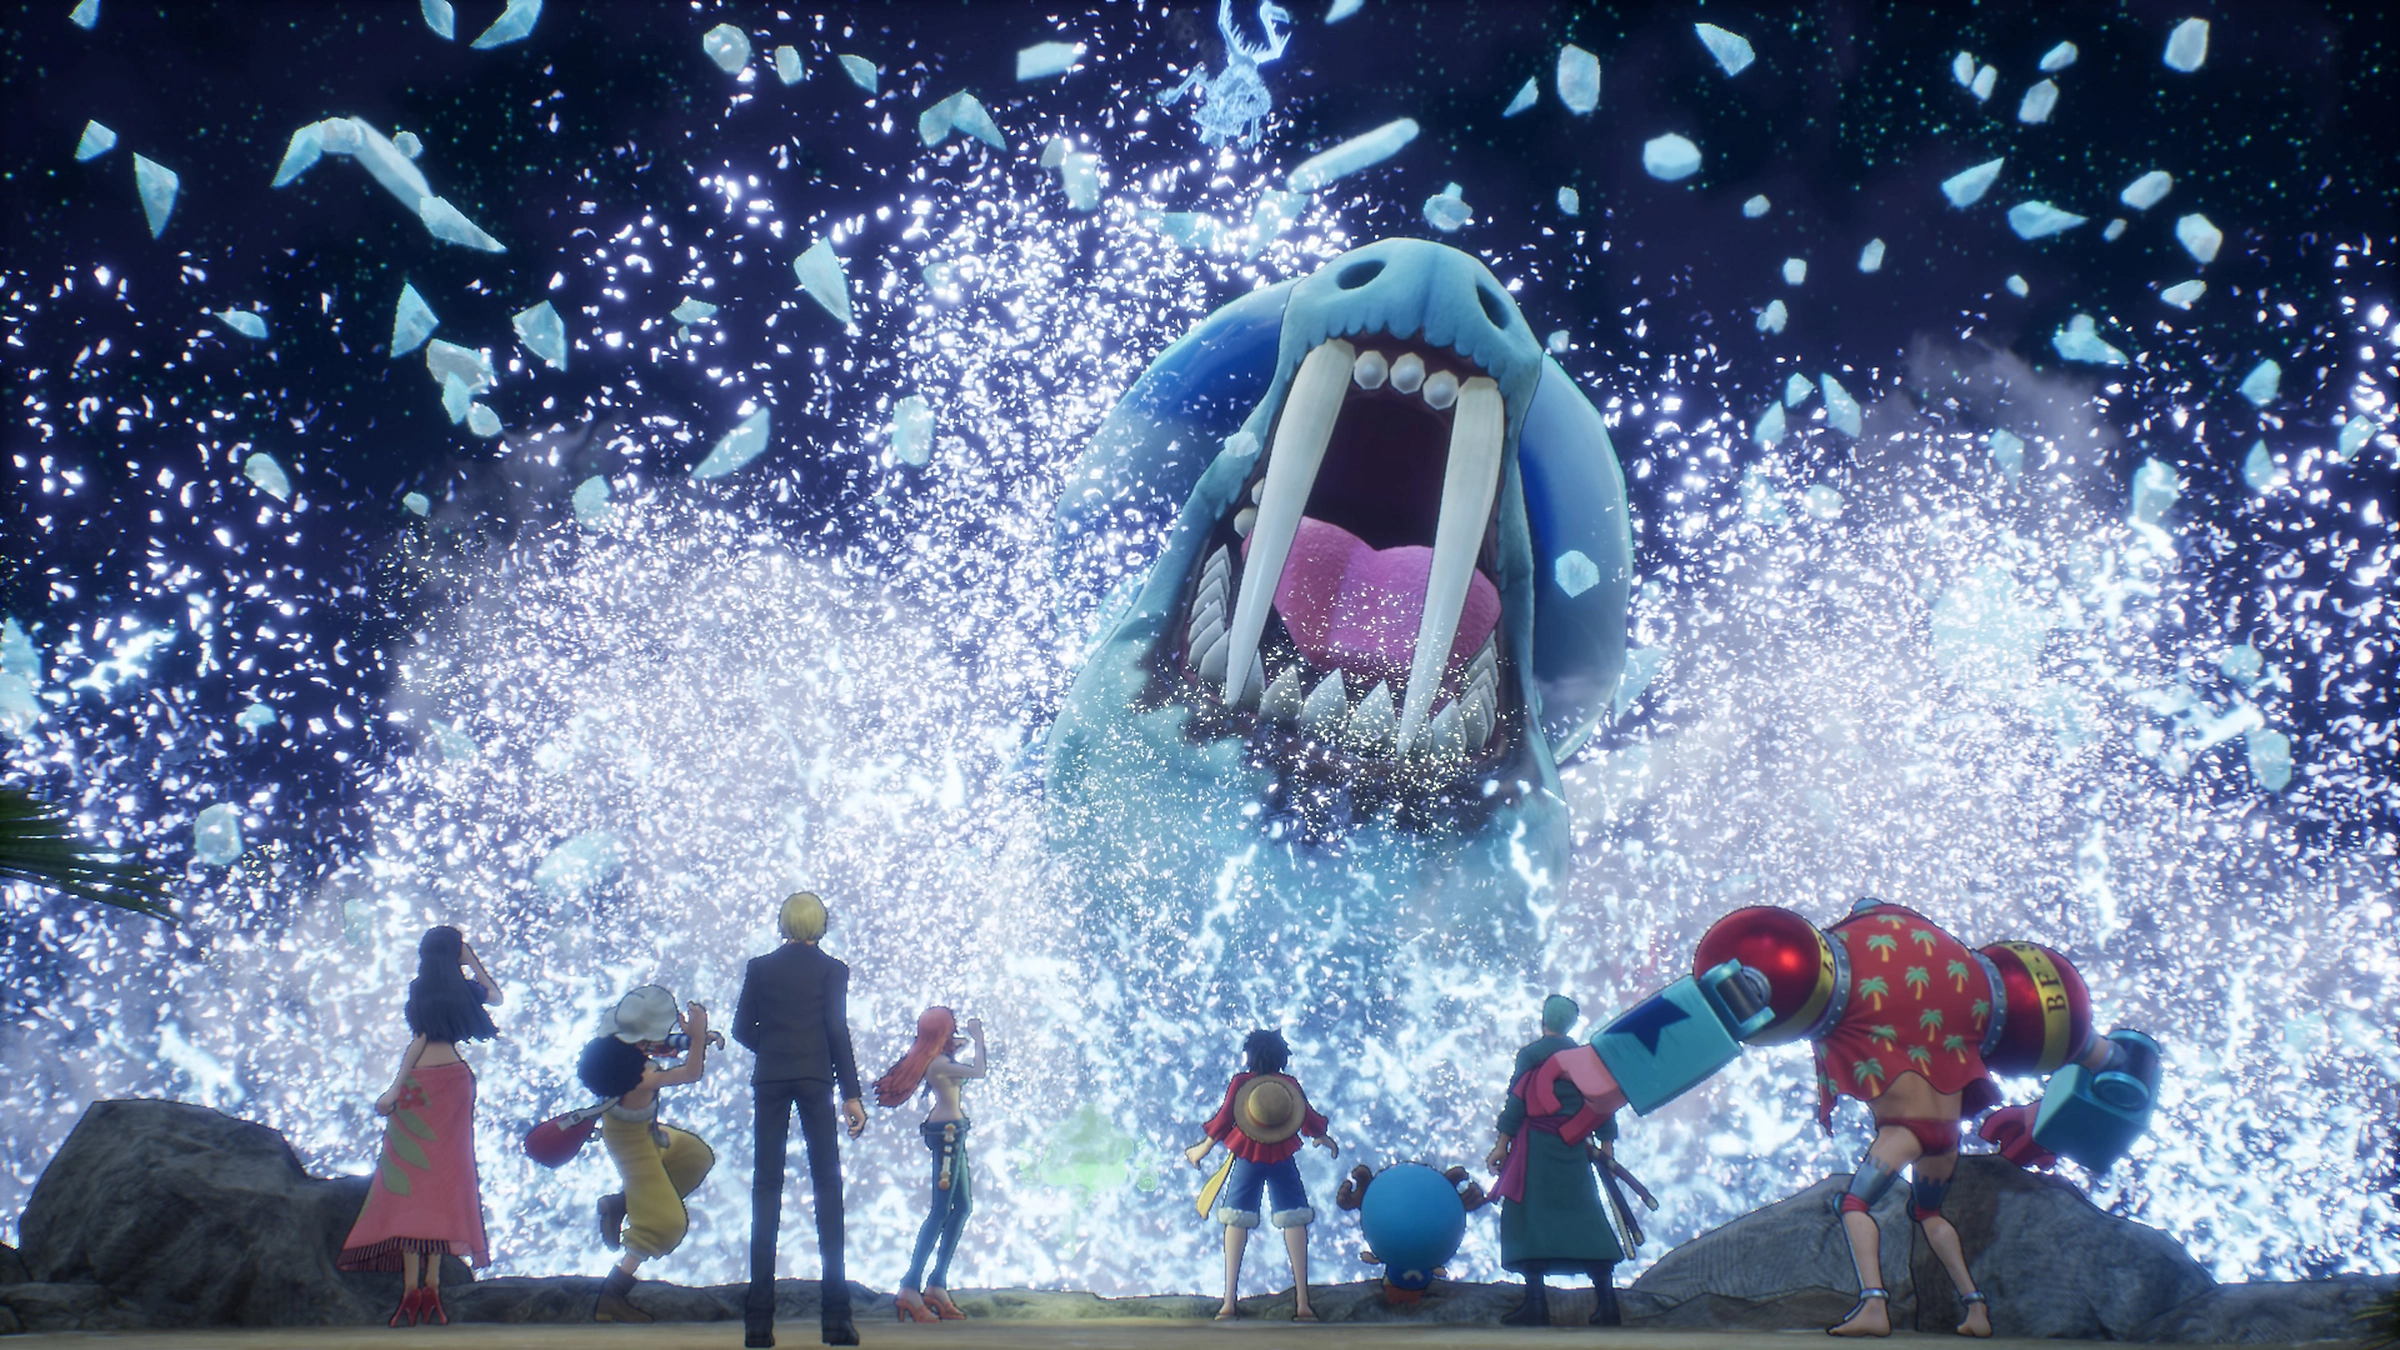 HD desktop wallpaper from One Piece Odyssey video game featuring the main characters confronting a large, menacing sea creature amidst splashing water.